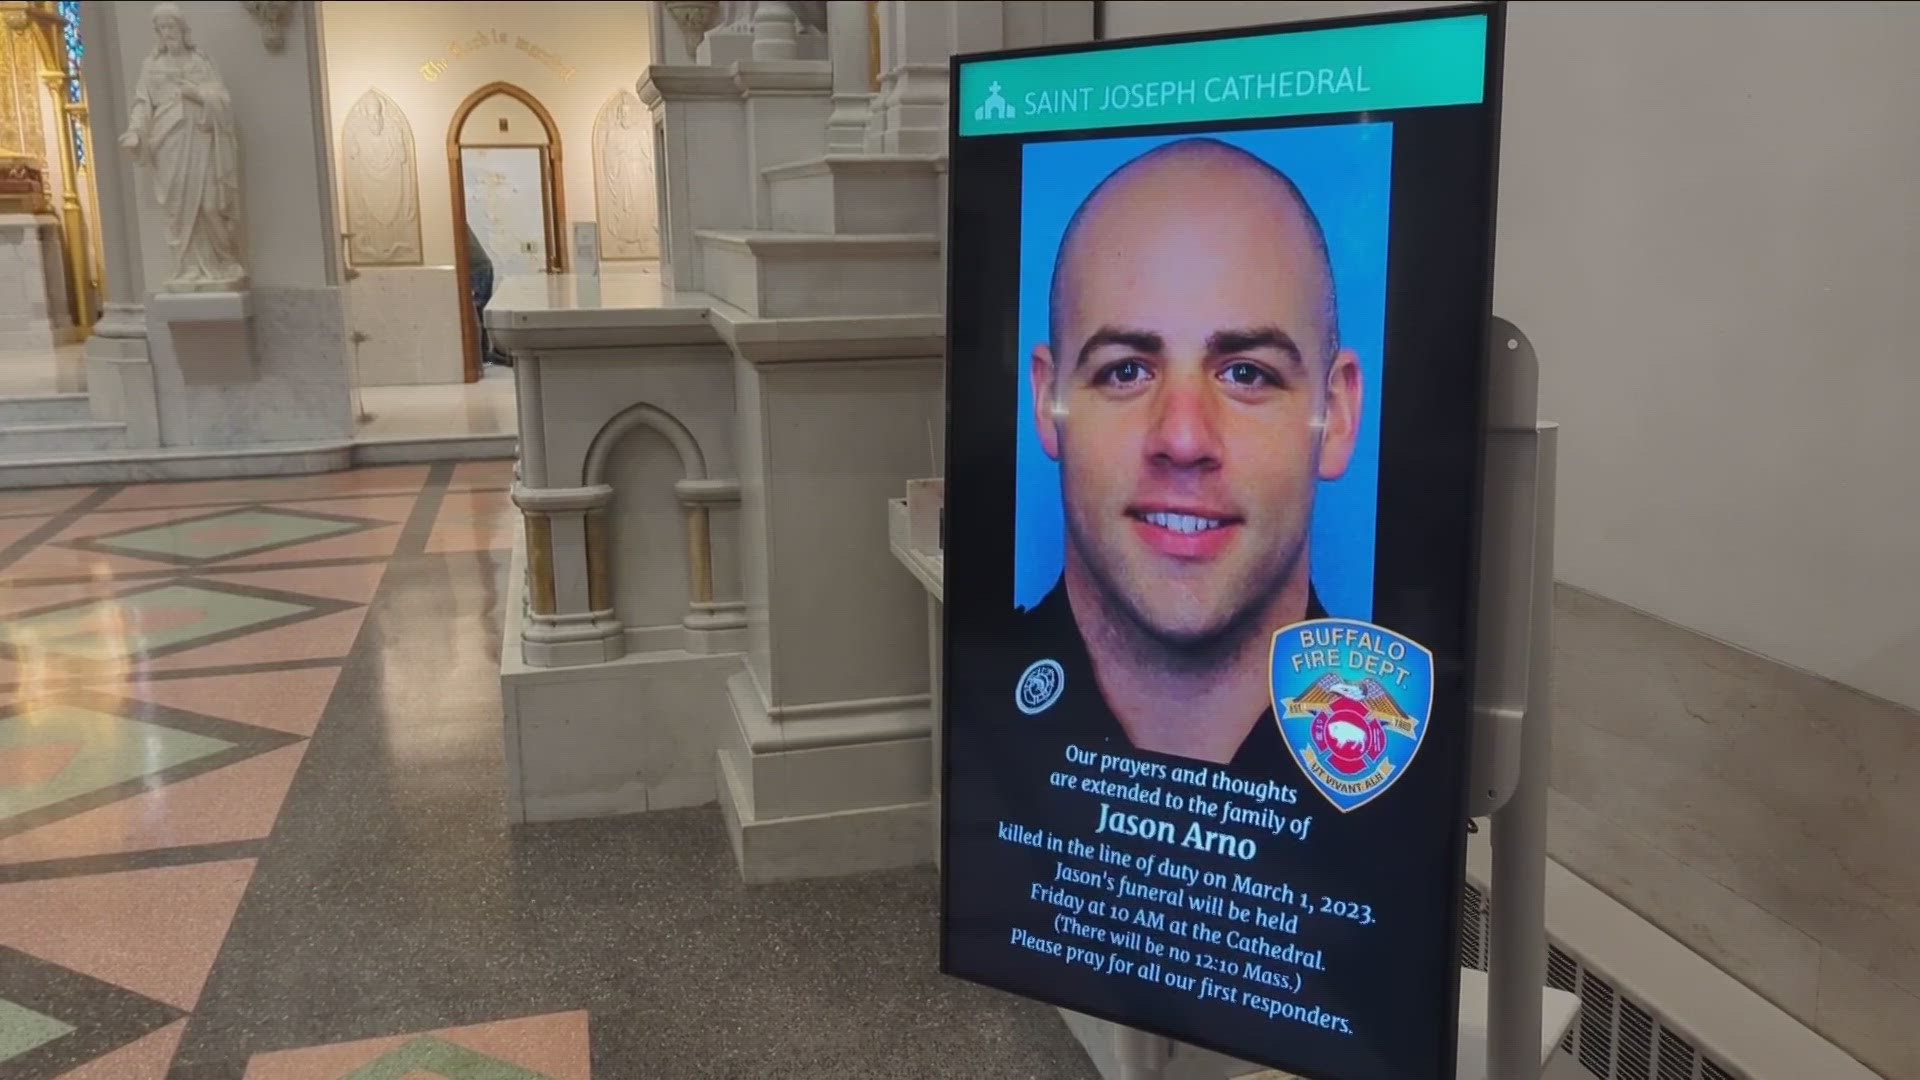 Arrangements for Firefighter Jason Arno announced ahead of funeral Friday